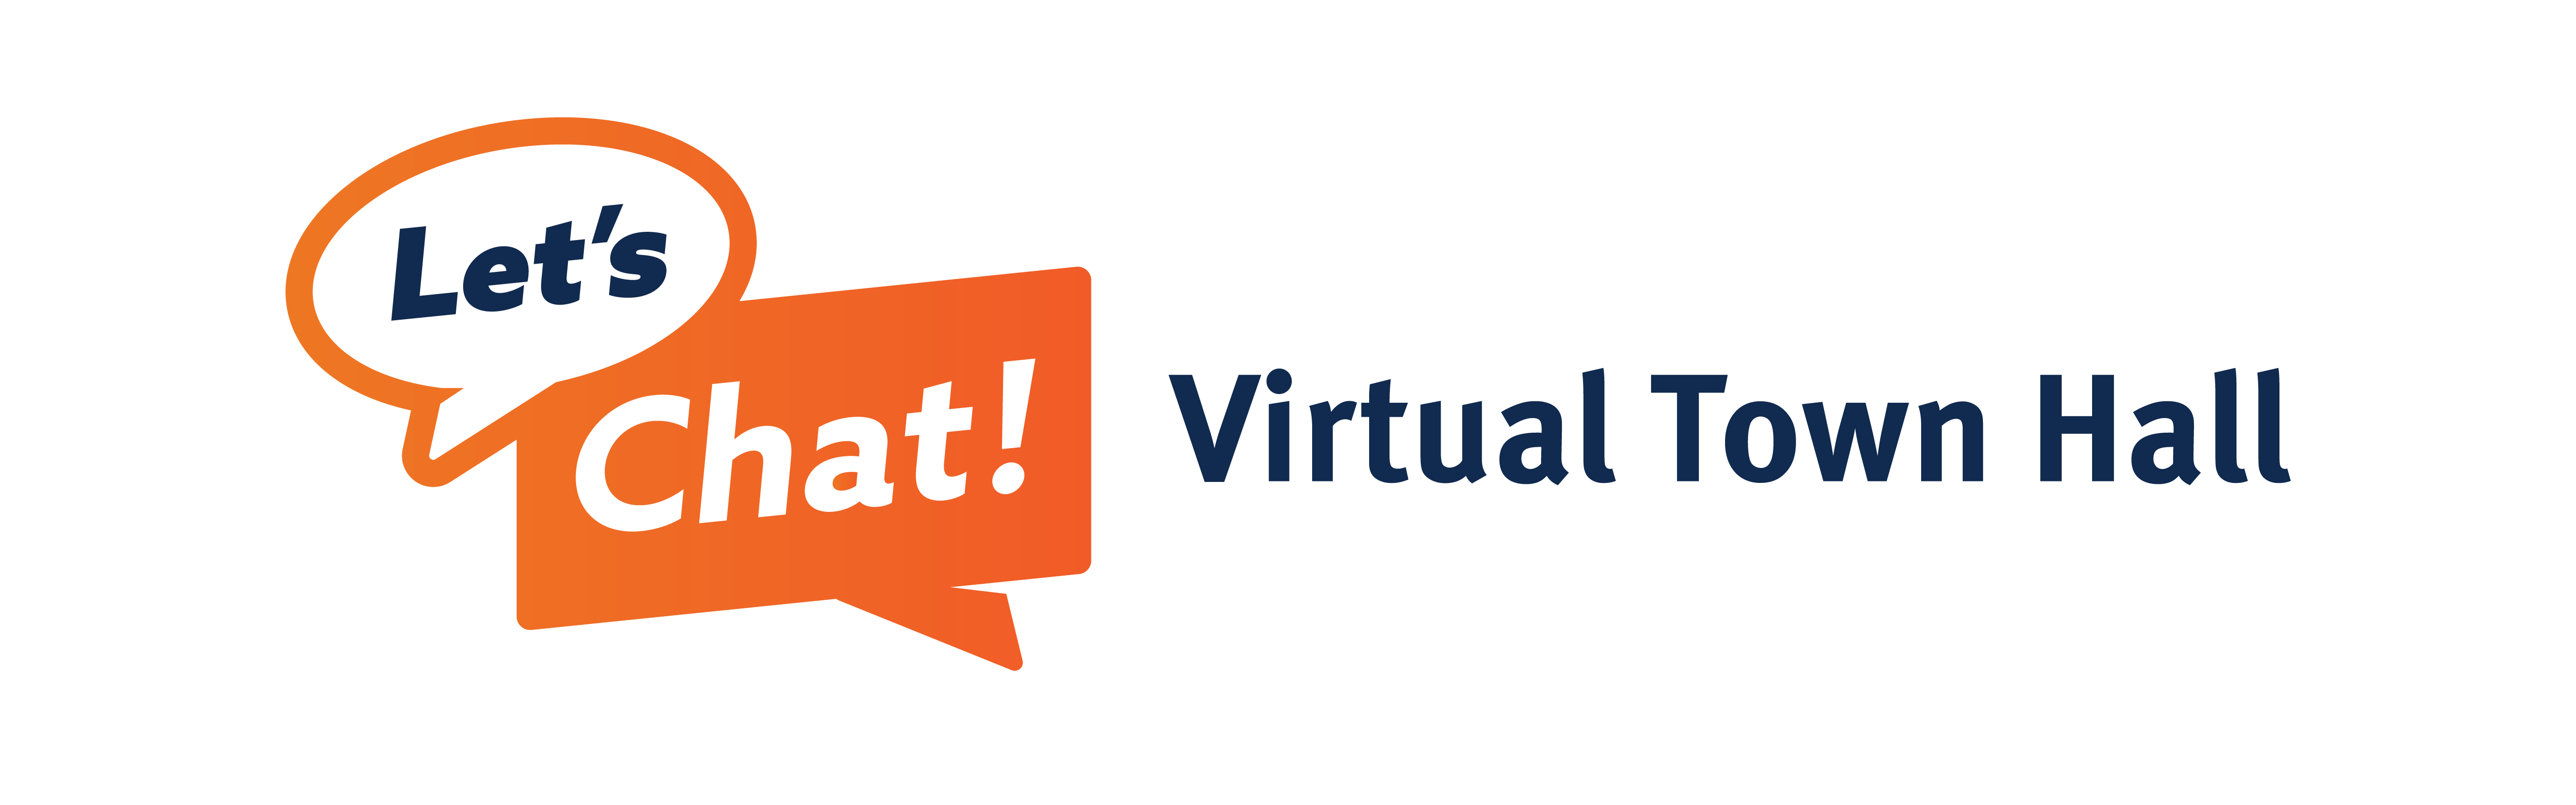 Let's Chat Virtual Town Hall